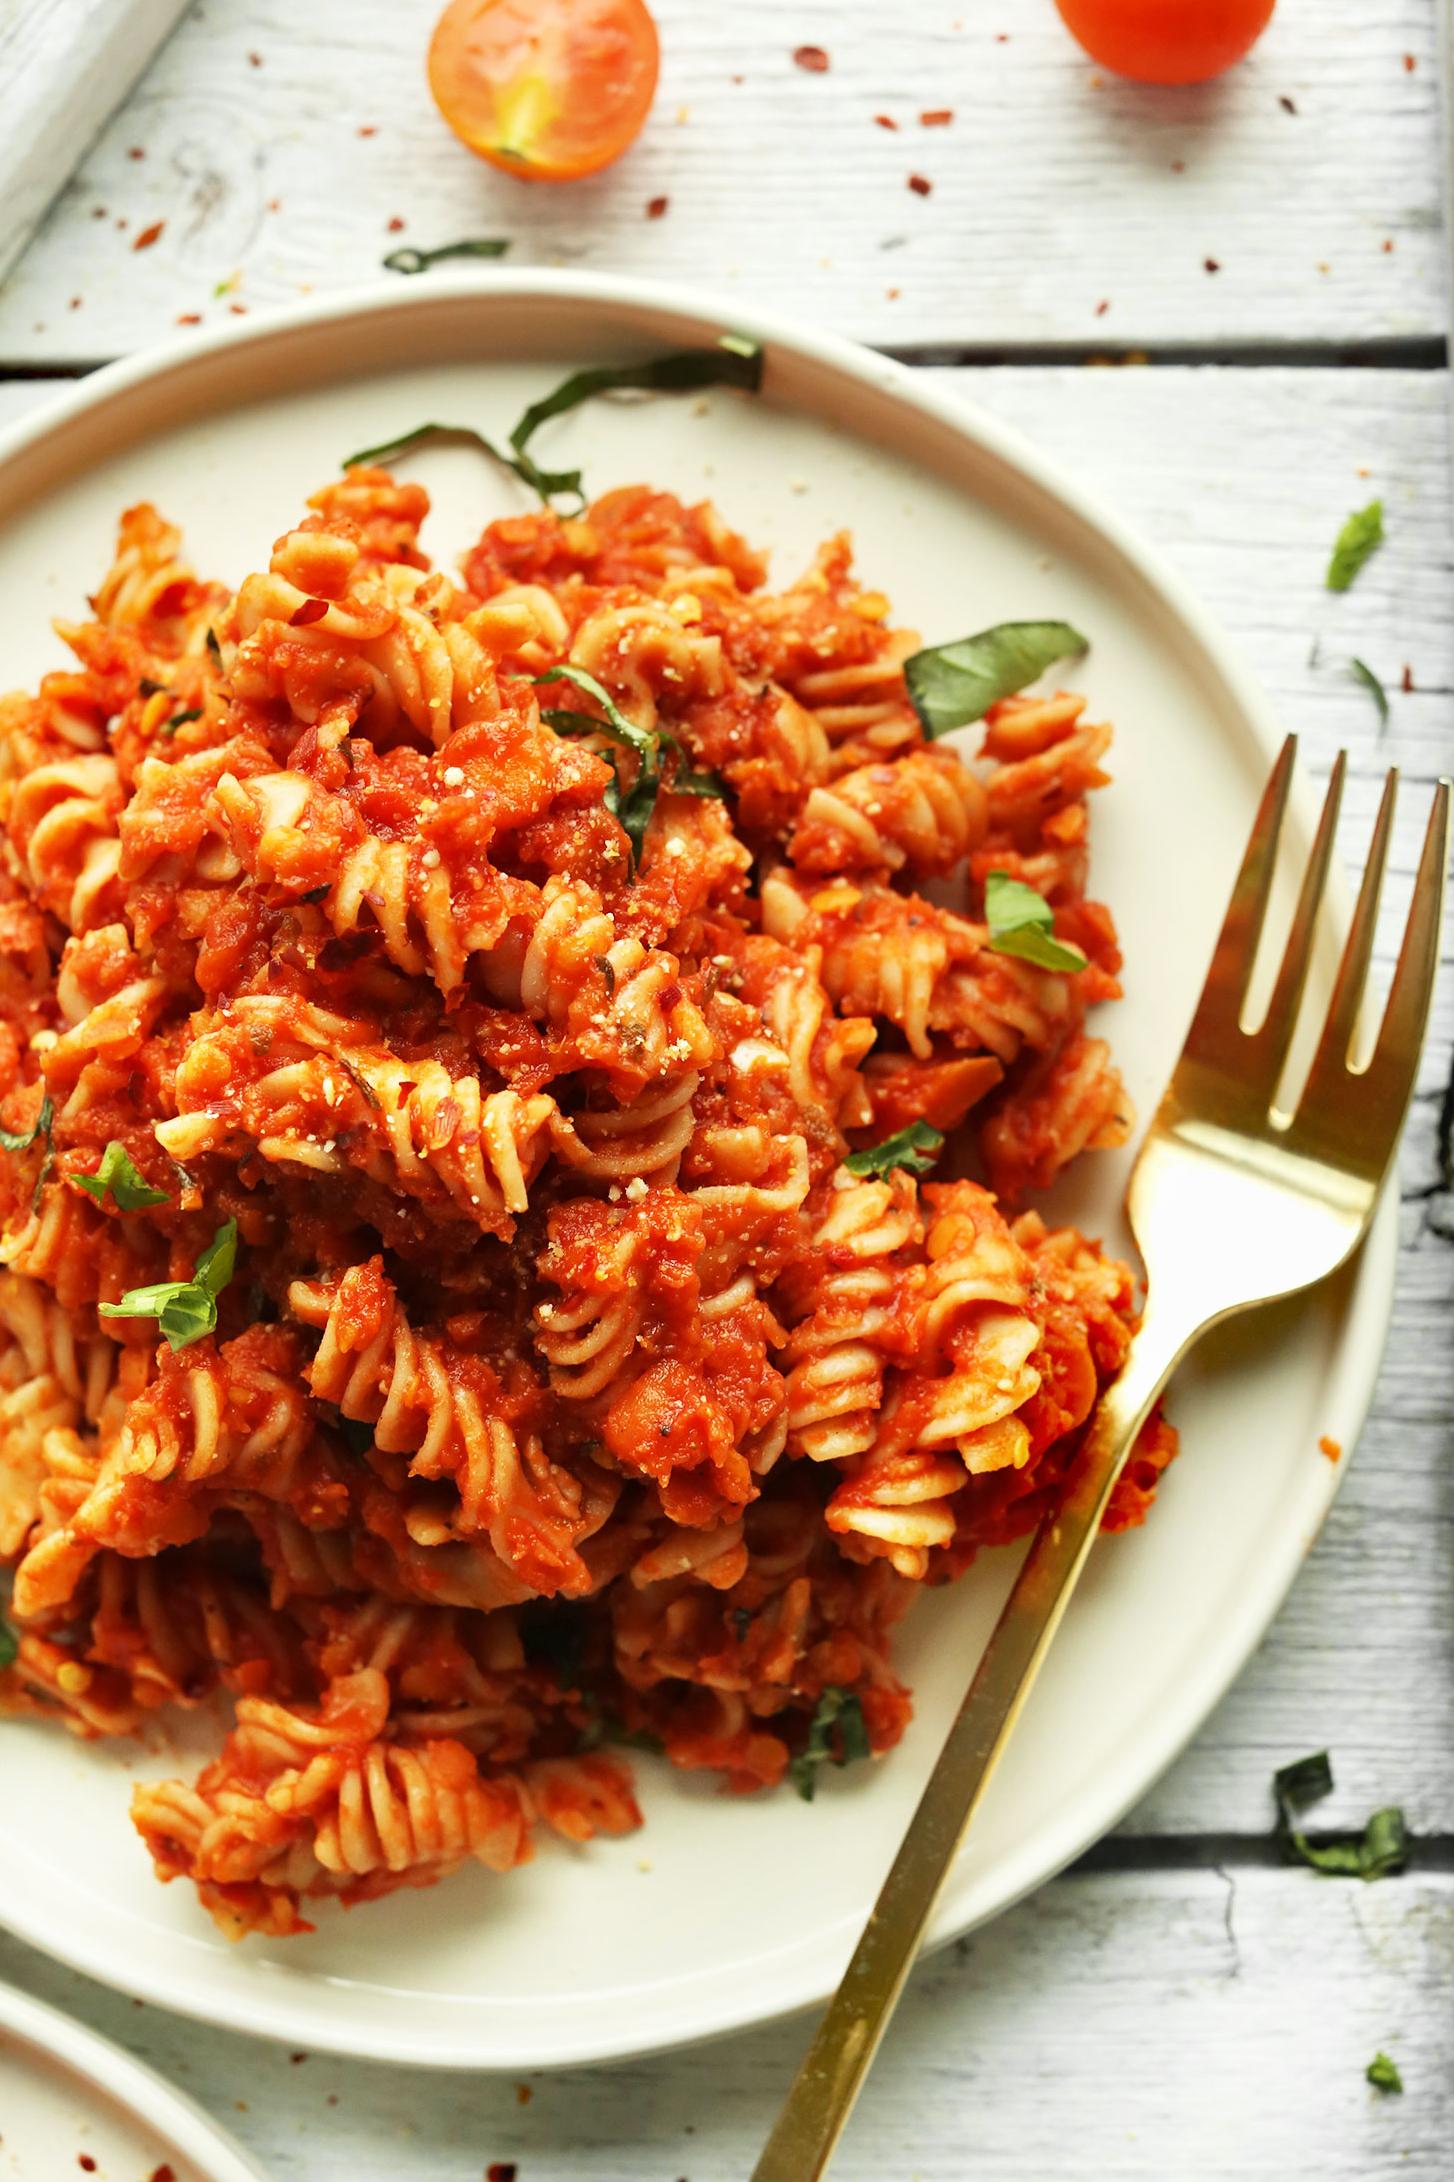  Whip up a batch of this red lentil spaghetti sauce in no time for a hearty and flavorful meal.